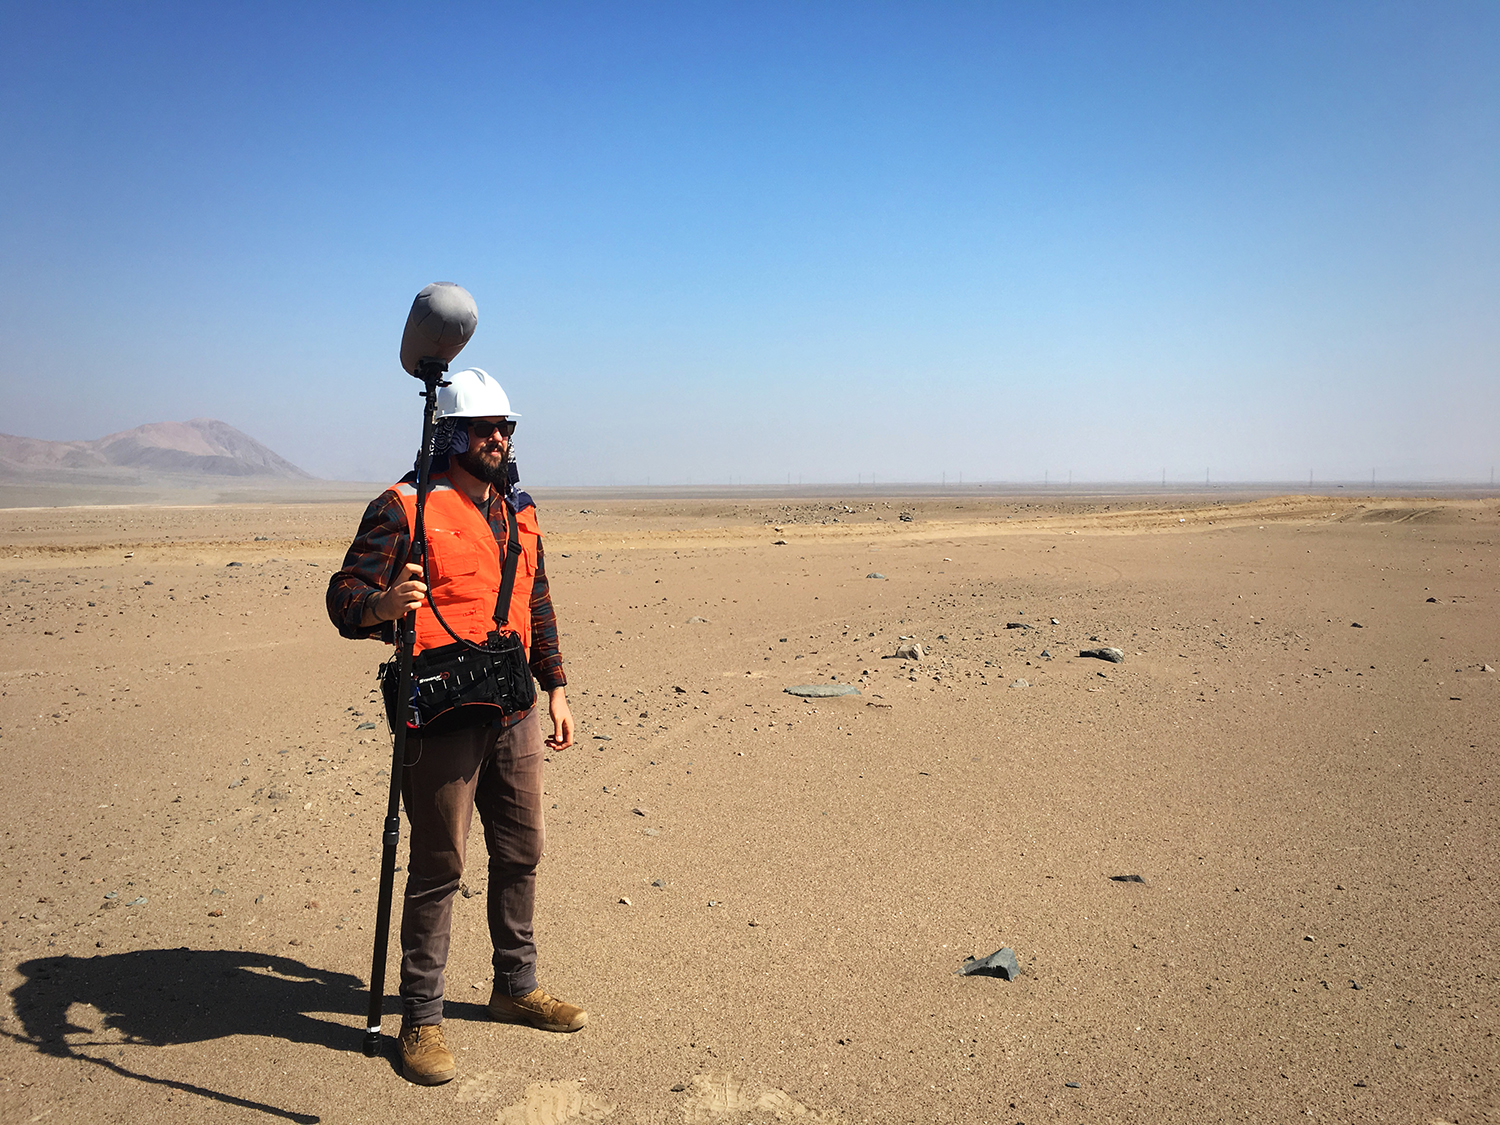 Ben Nimkin on-location in the Atacama Desert for the New York Times Voyages documentary entitled “Listen to the World.” 